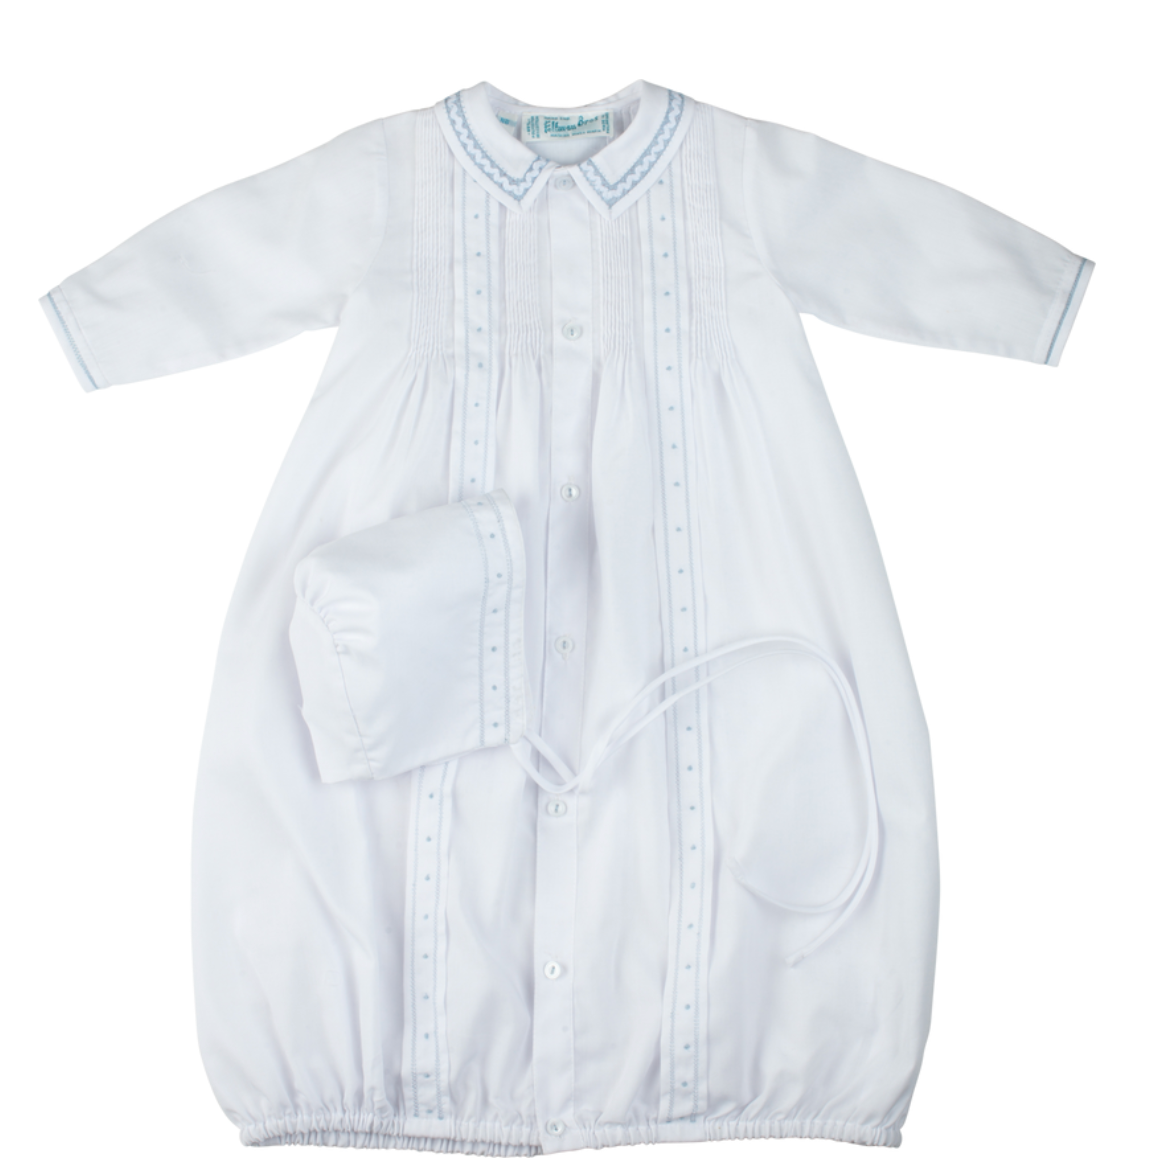 Boys Dot Take Me Home Gown in White and Blue